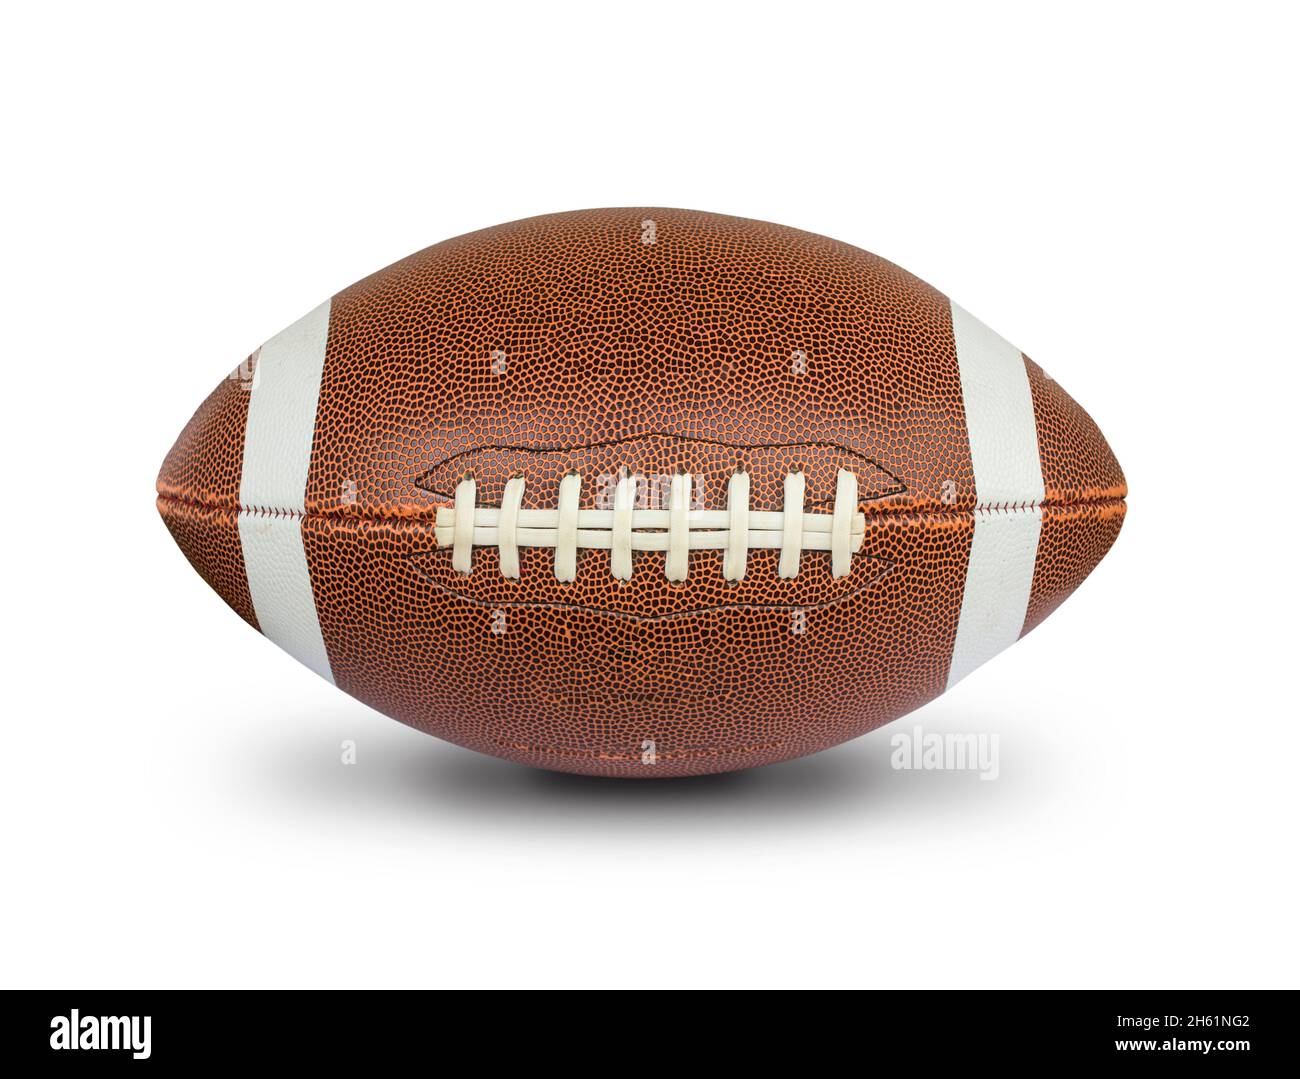 American football ball isolated on white background Stock Photo